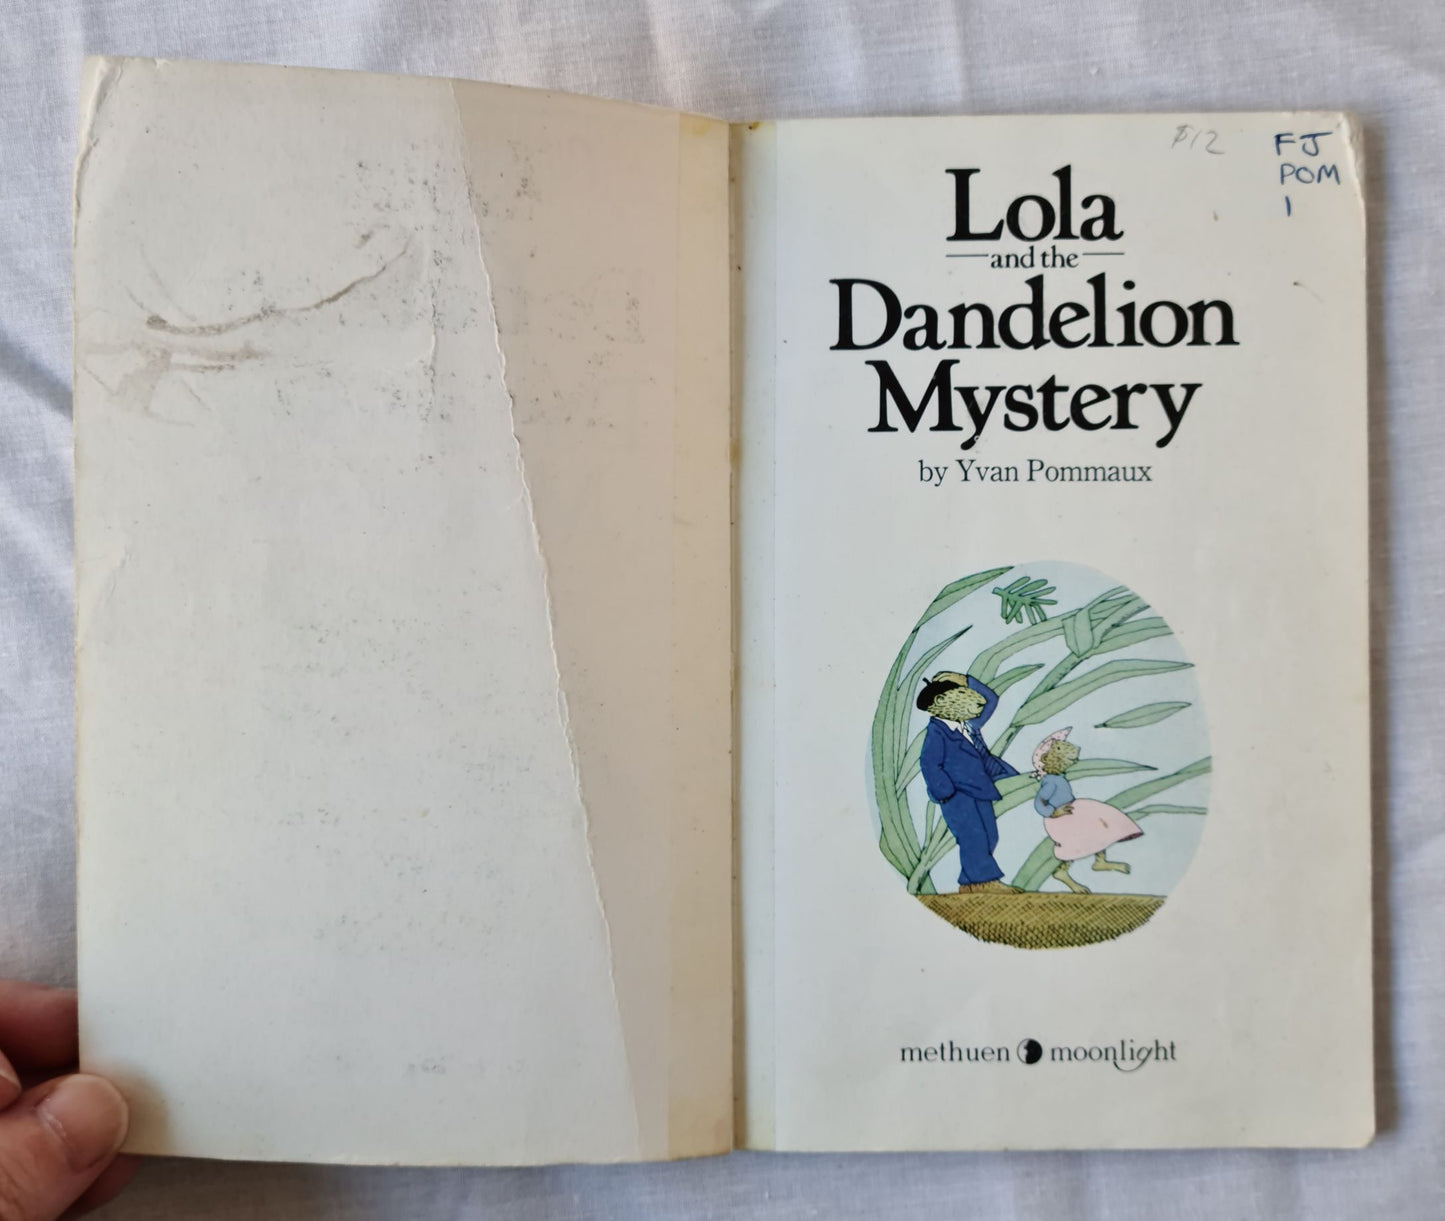 Lola and the Dandelion Mystery by Yvan Pommaux